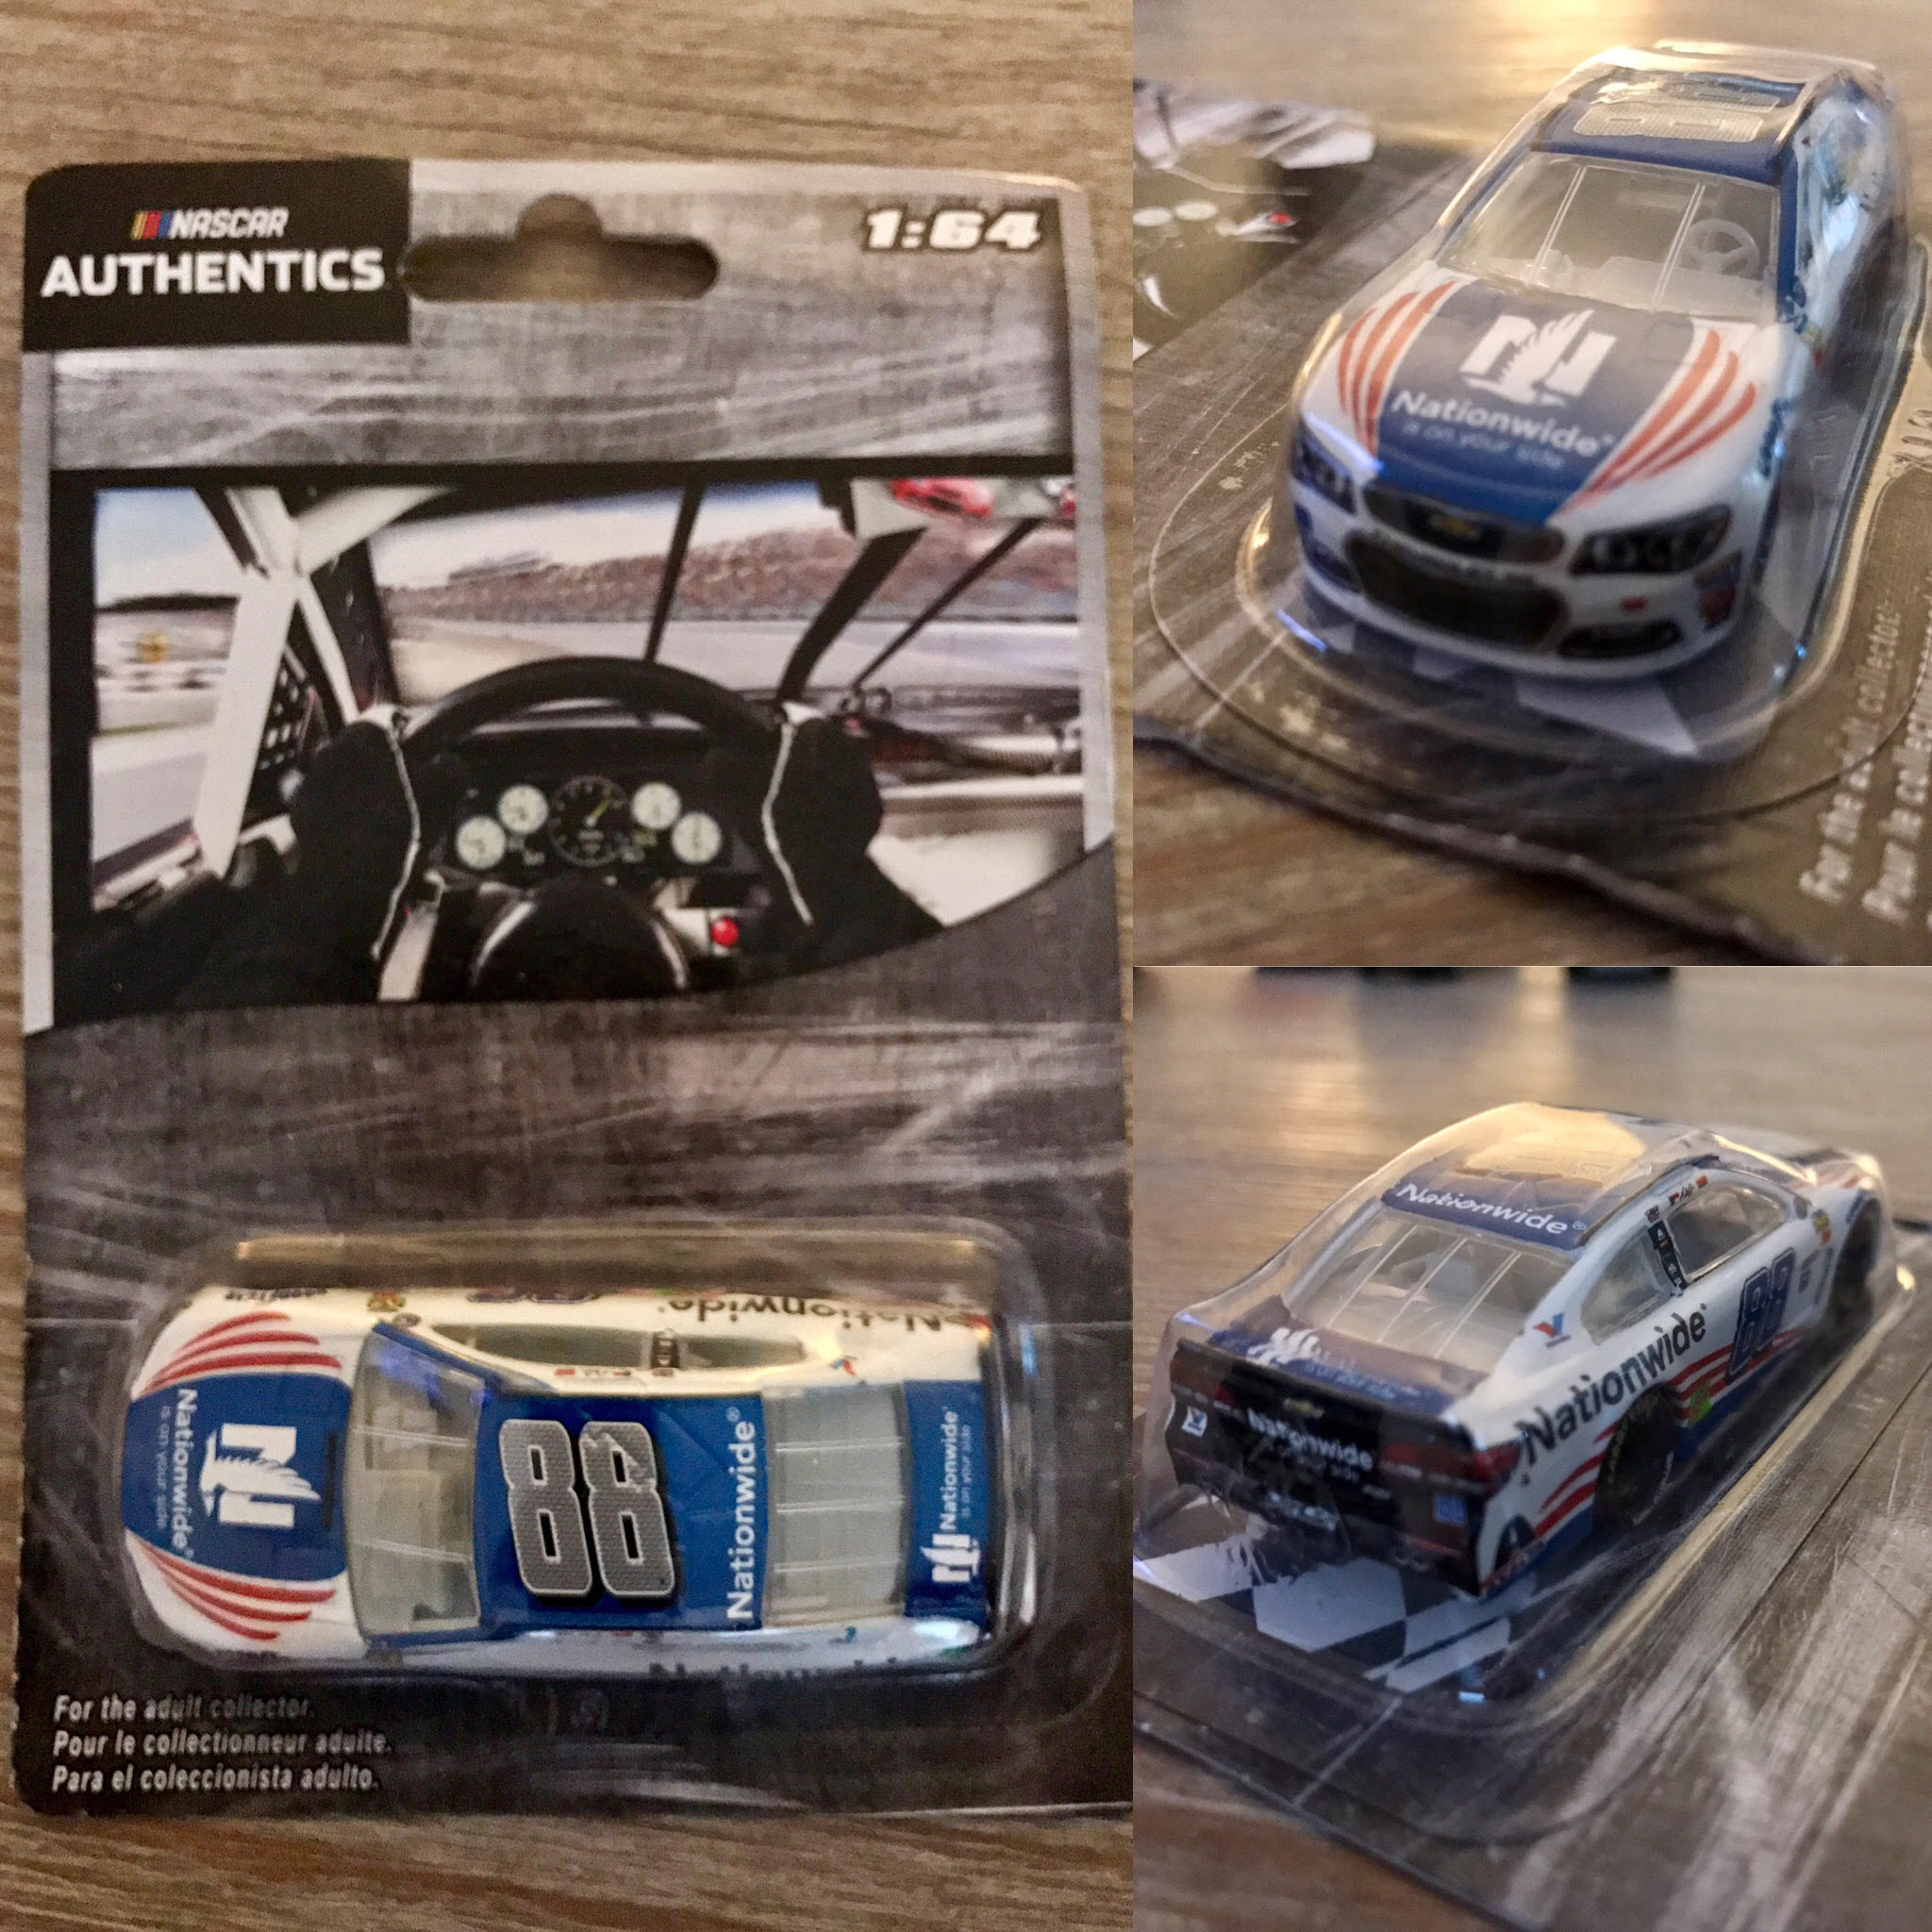 Nothing like a patriotic car on the track and in die-cast form.